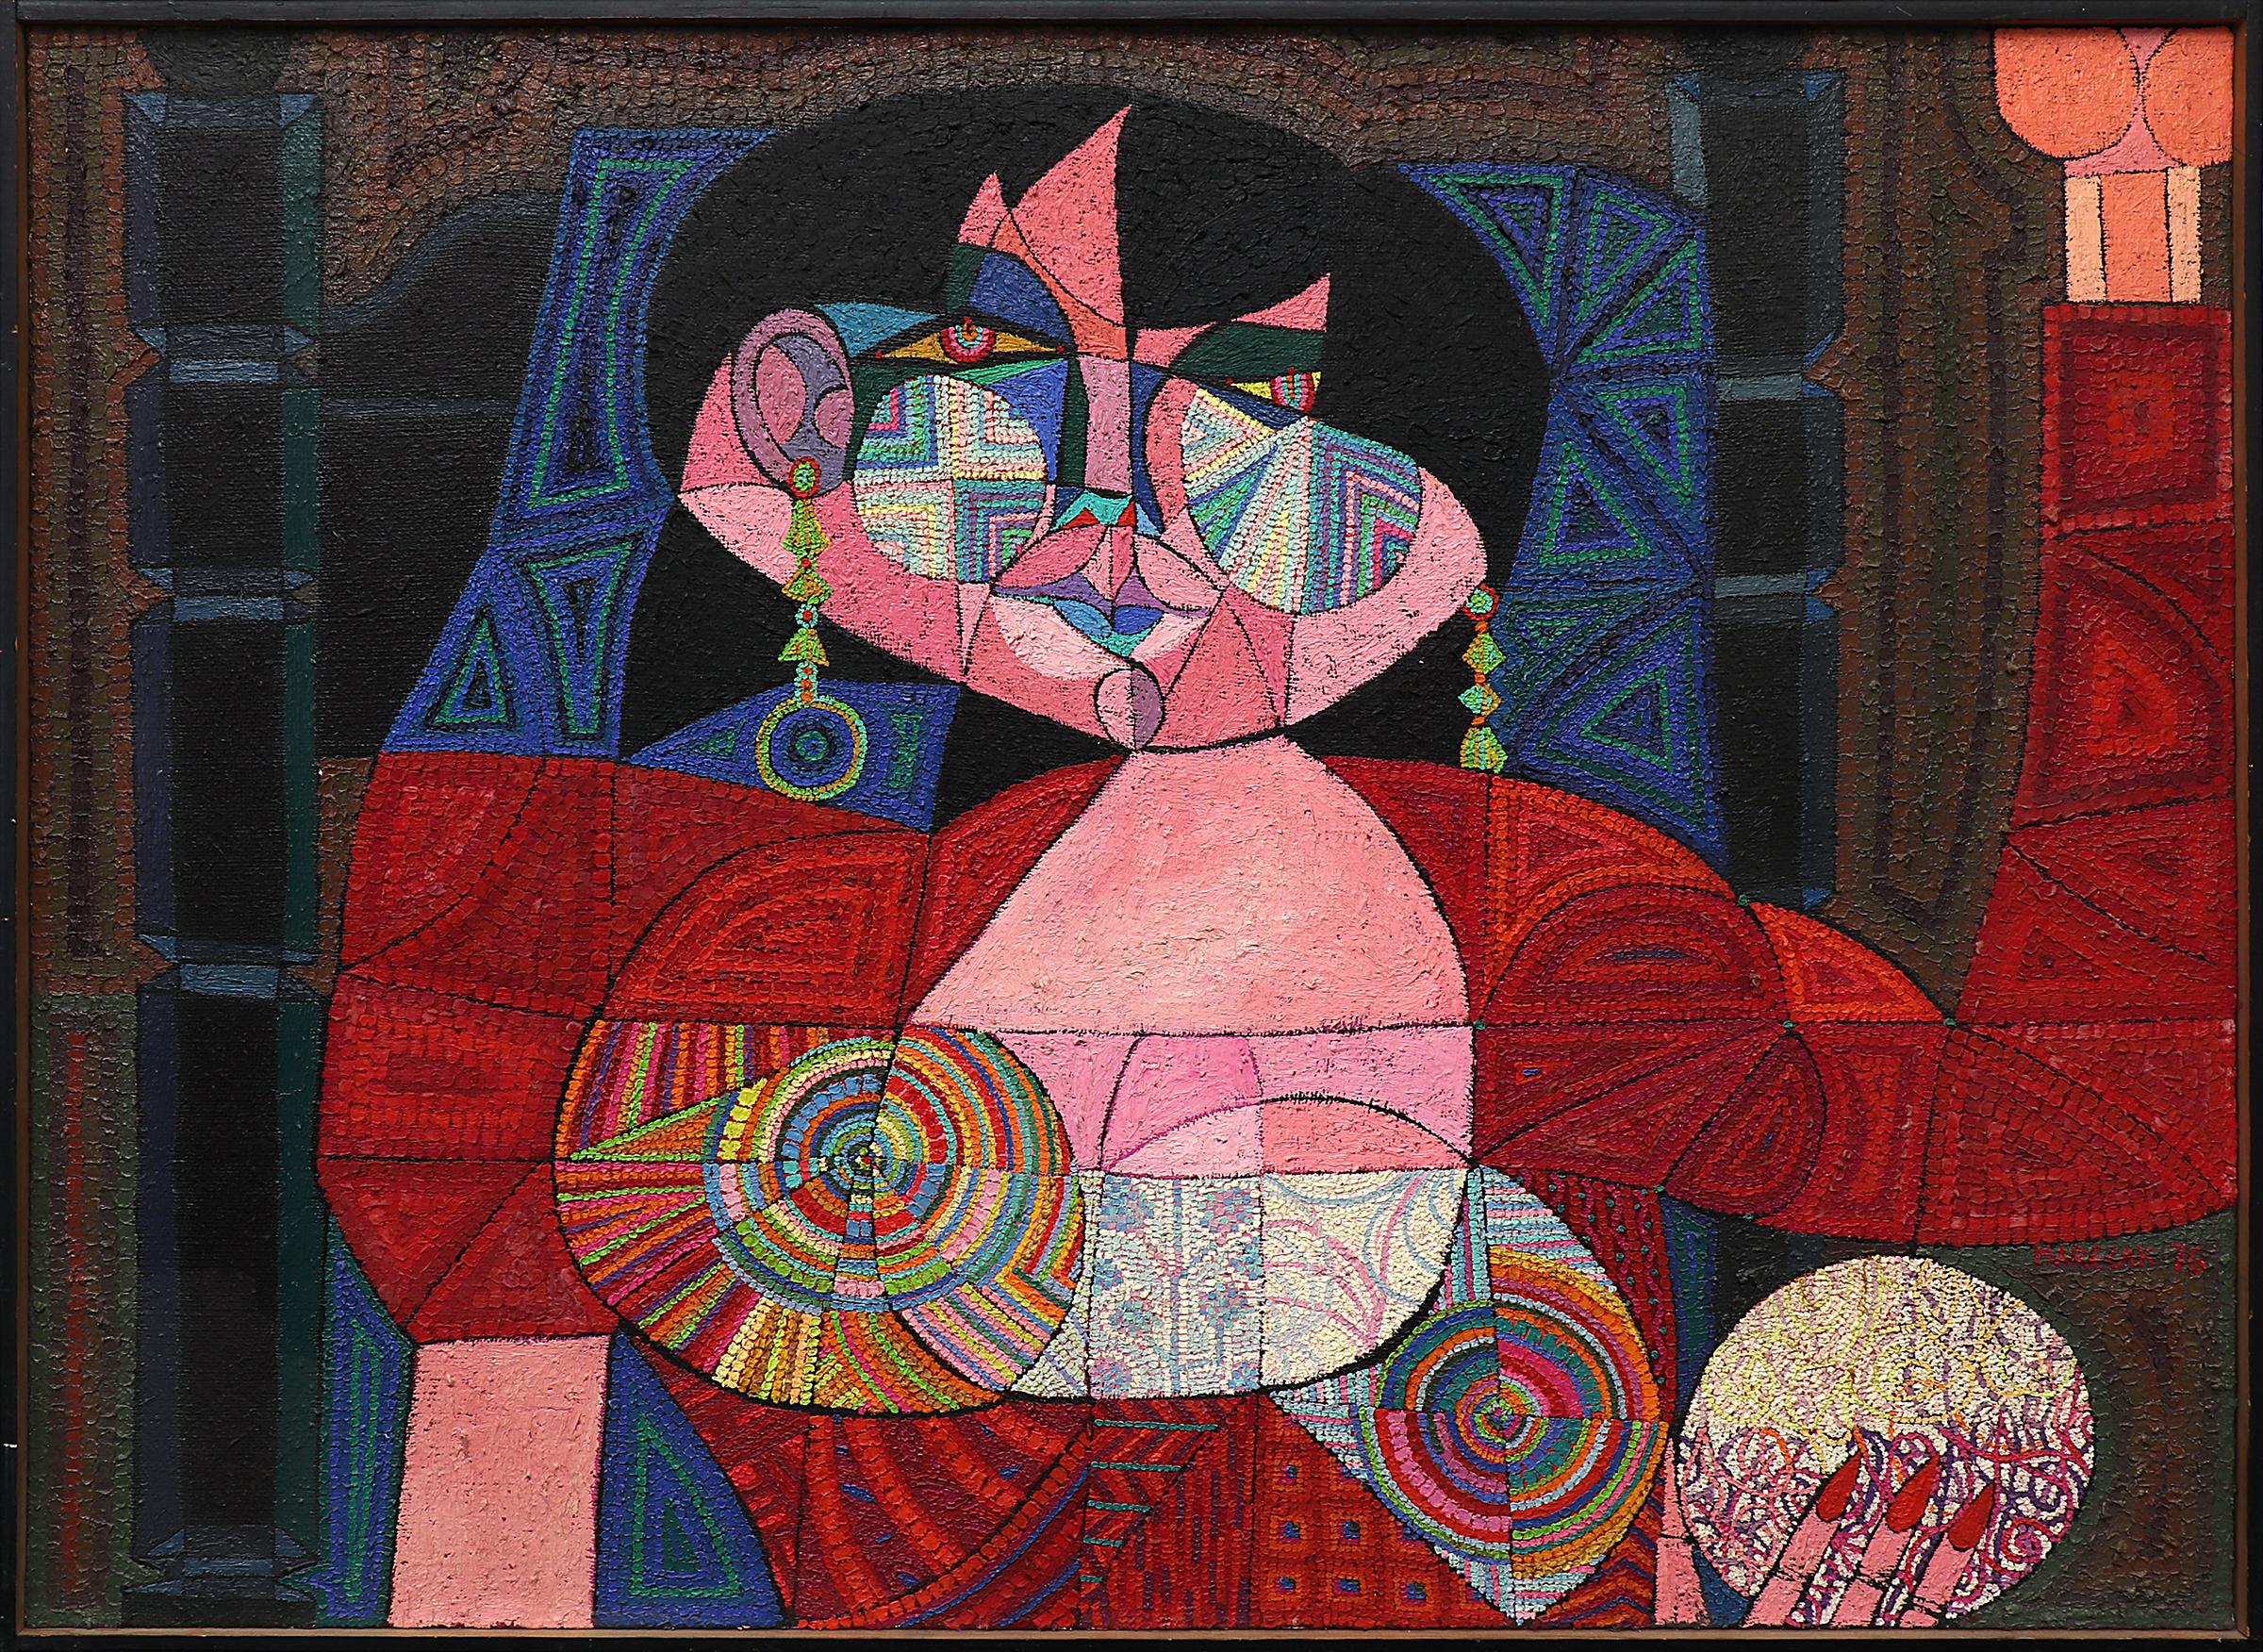 Edward Marecak Abstract Painting - Sybil (The Prophetess), 1970s Abstract Figurative Oil Painting, Pink Blue Red